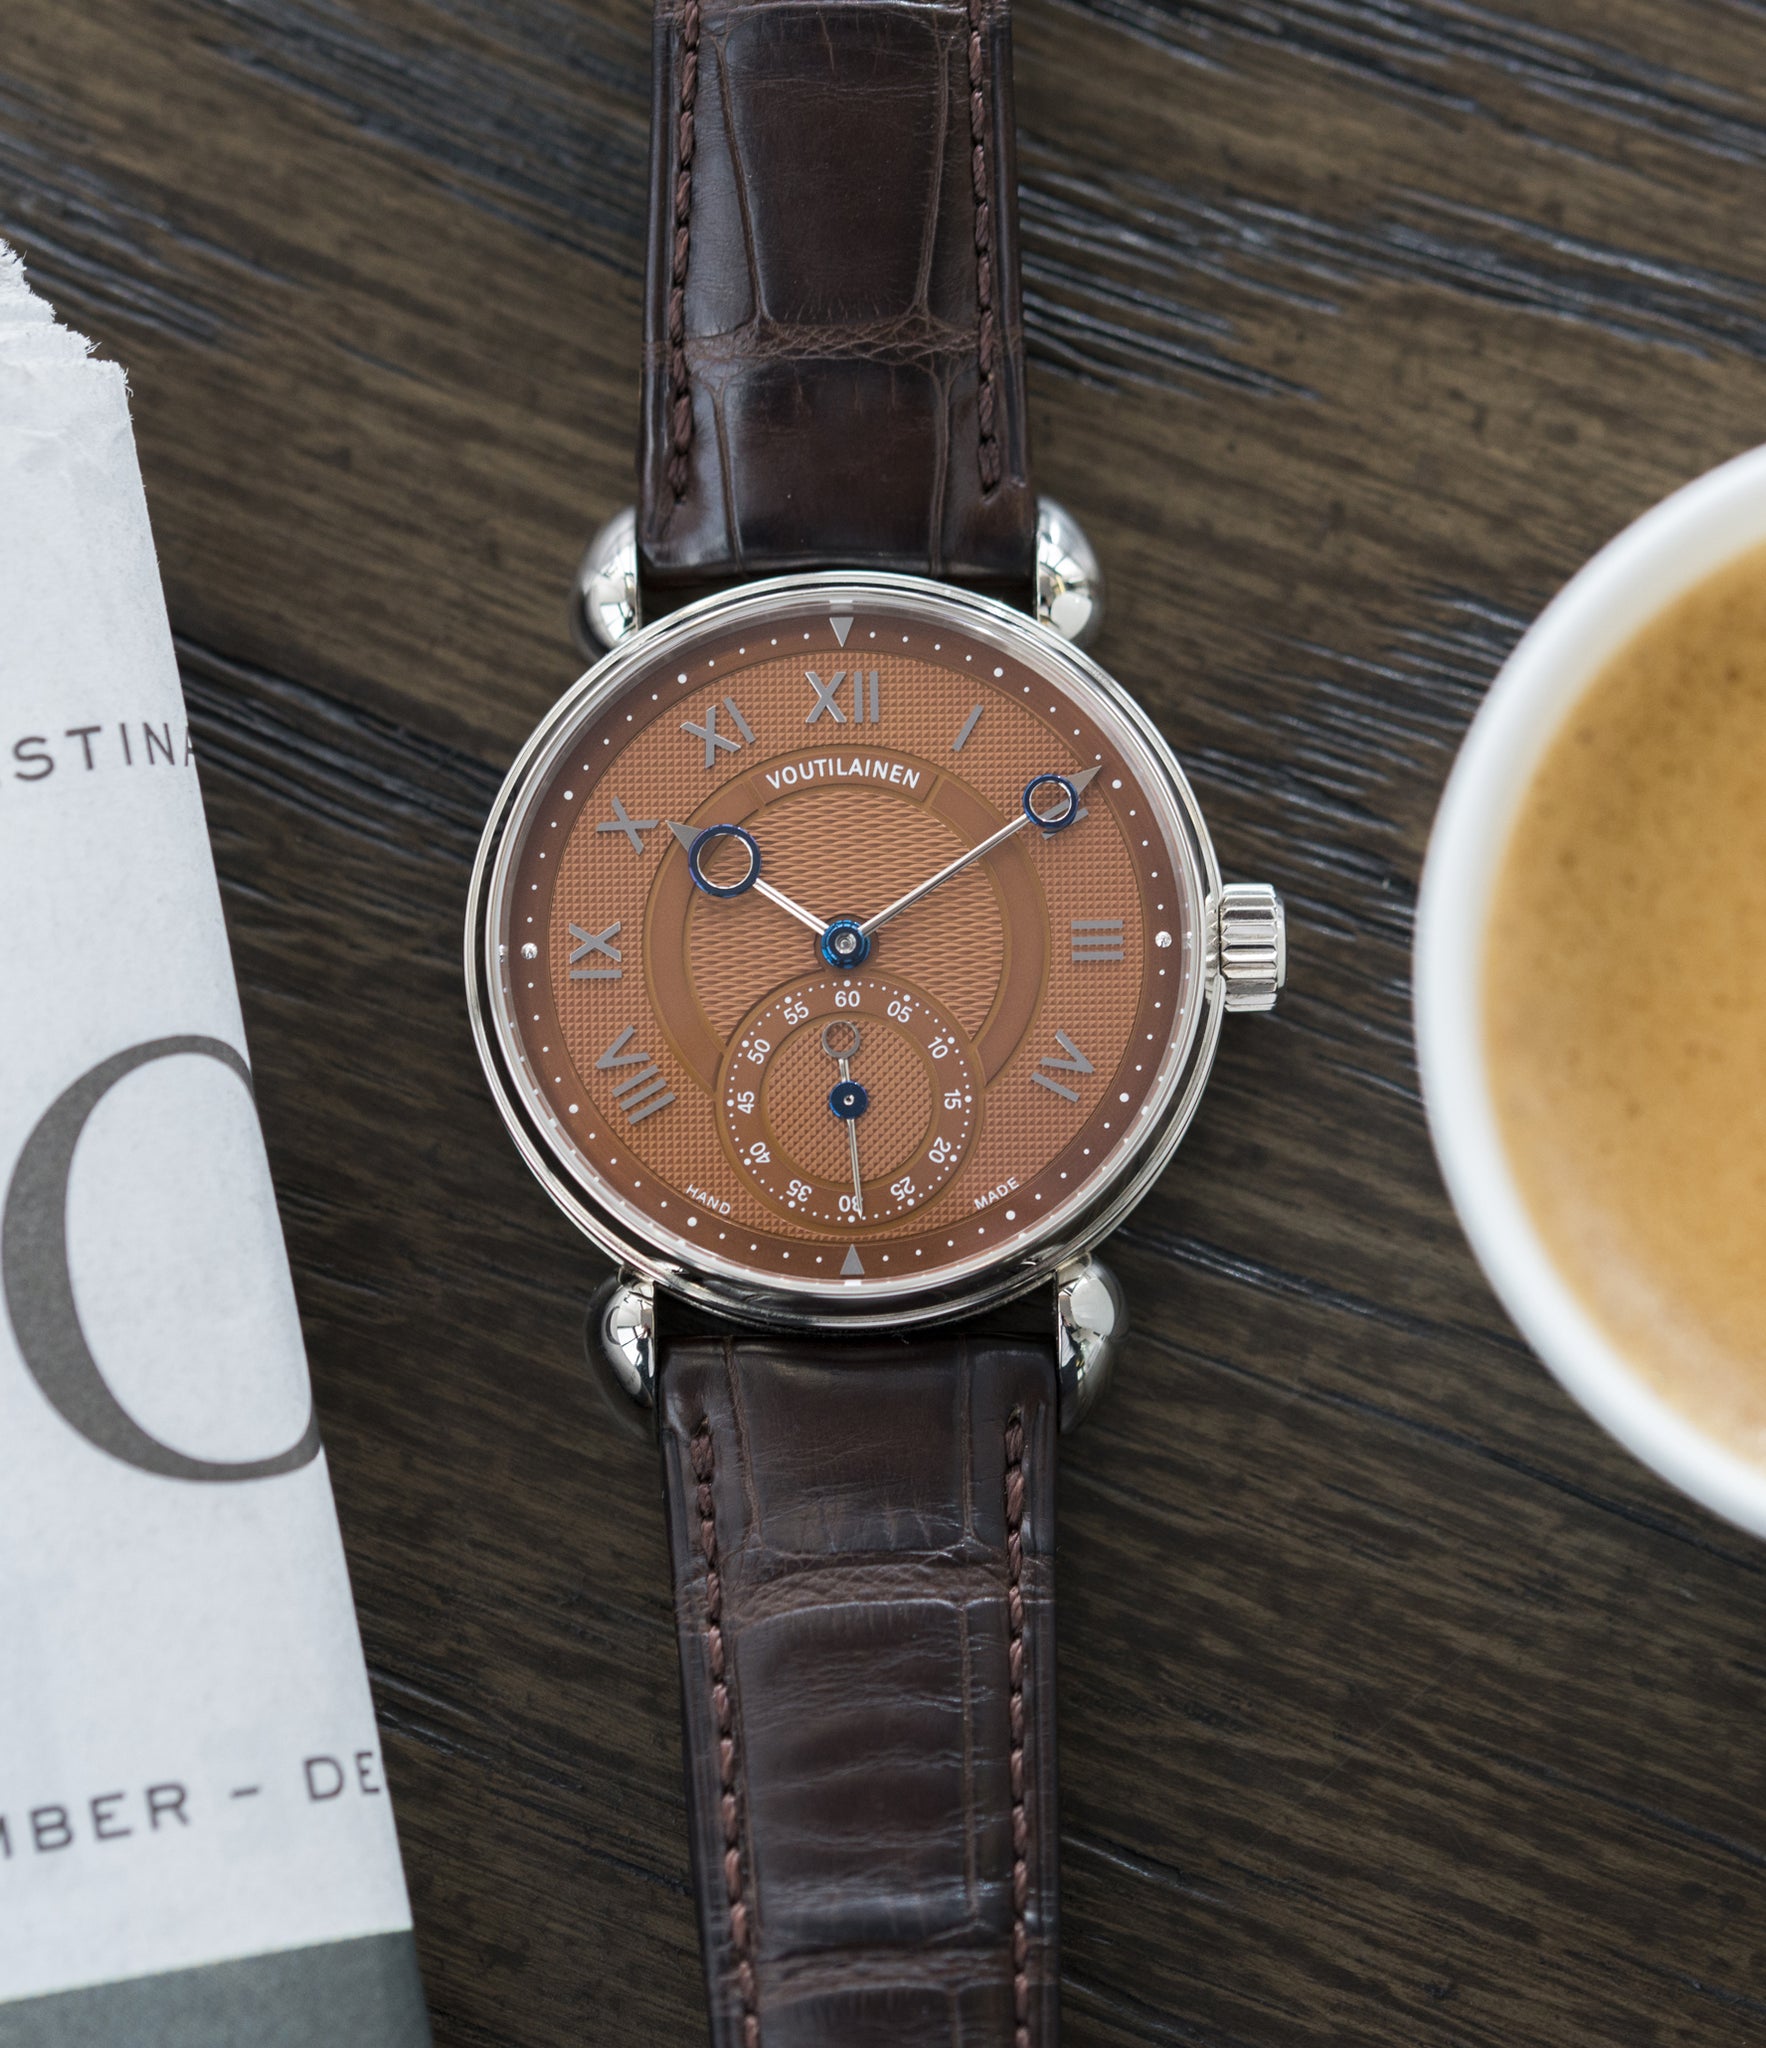 salmon copper dial Kari Voutilainen Observatoire Limited Edition rare brown dial watch online at A Collected Man London specialist endorsed seller of pre-owned independent watchmakers